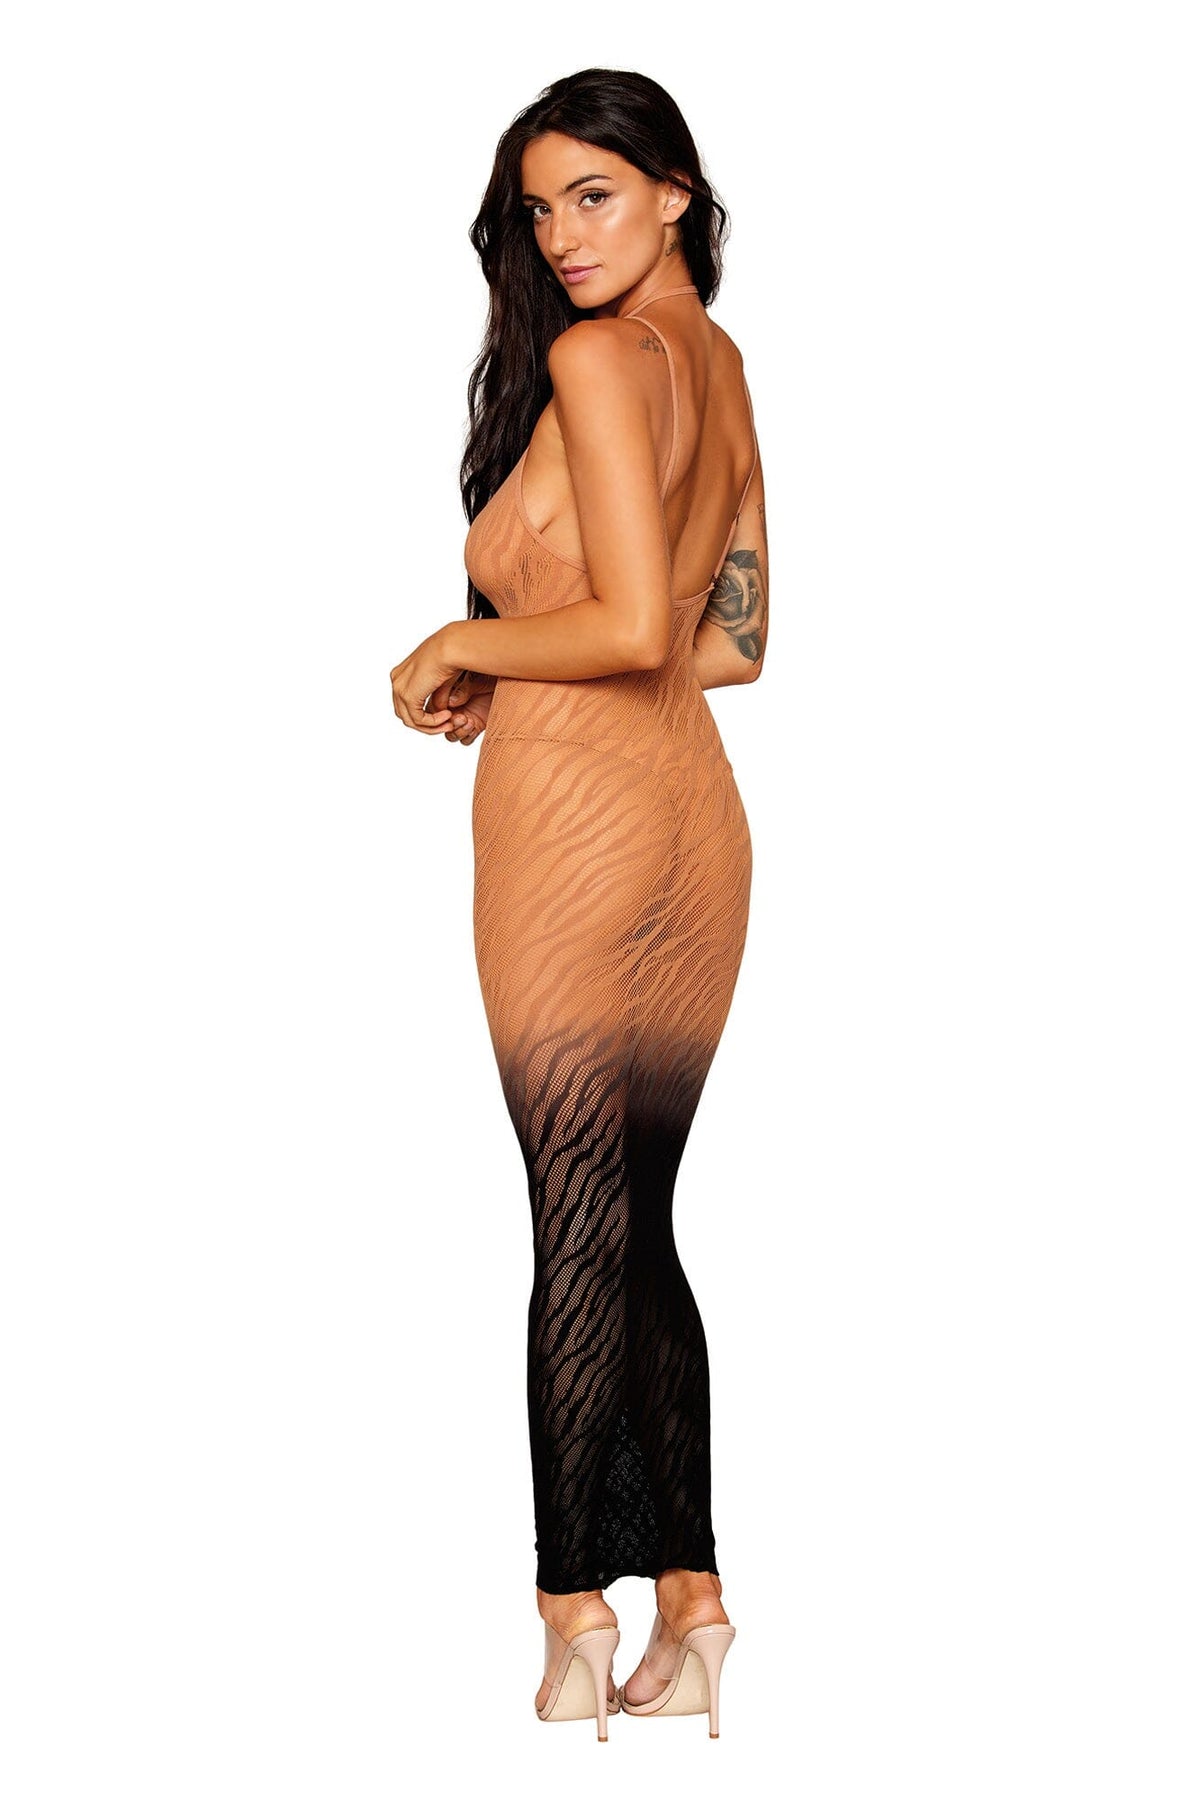 Dreamgirl Seamless Zebra Knit Design Bodystocking Gown with Two-Tone Ombre Color Bodystocking Dreamgirl 